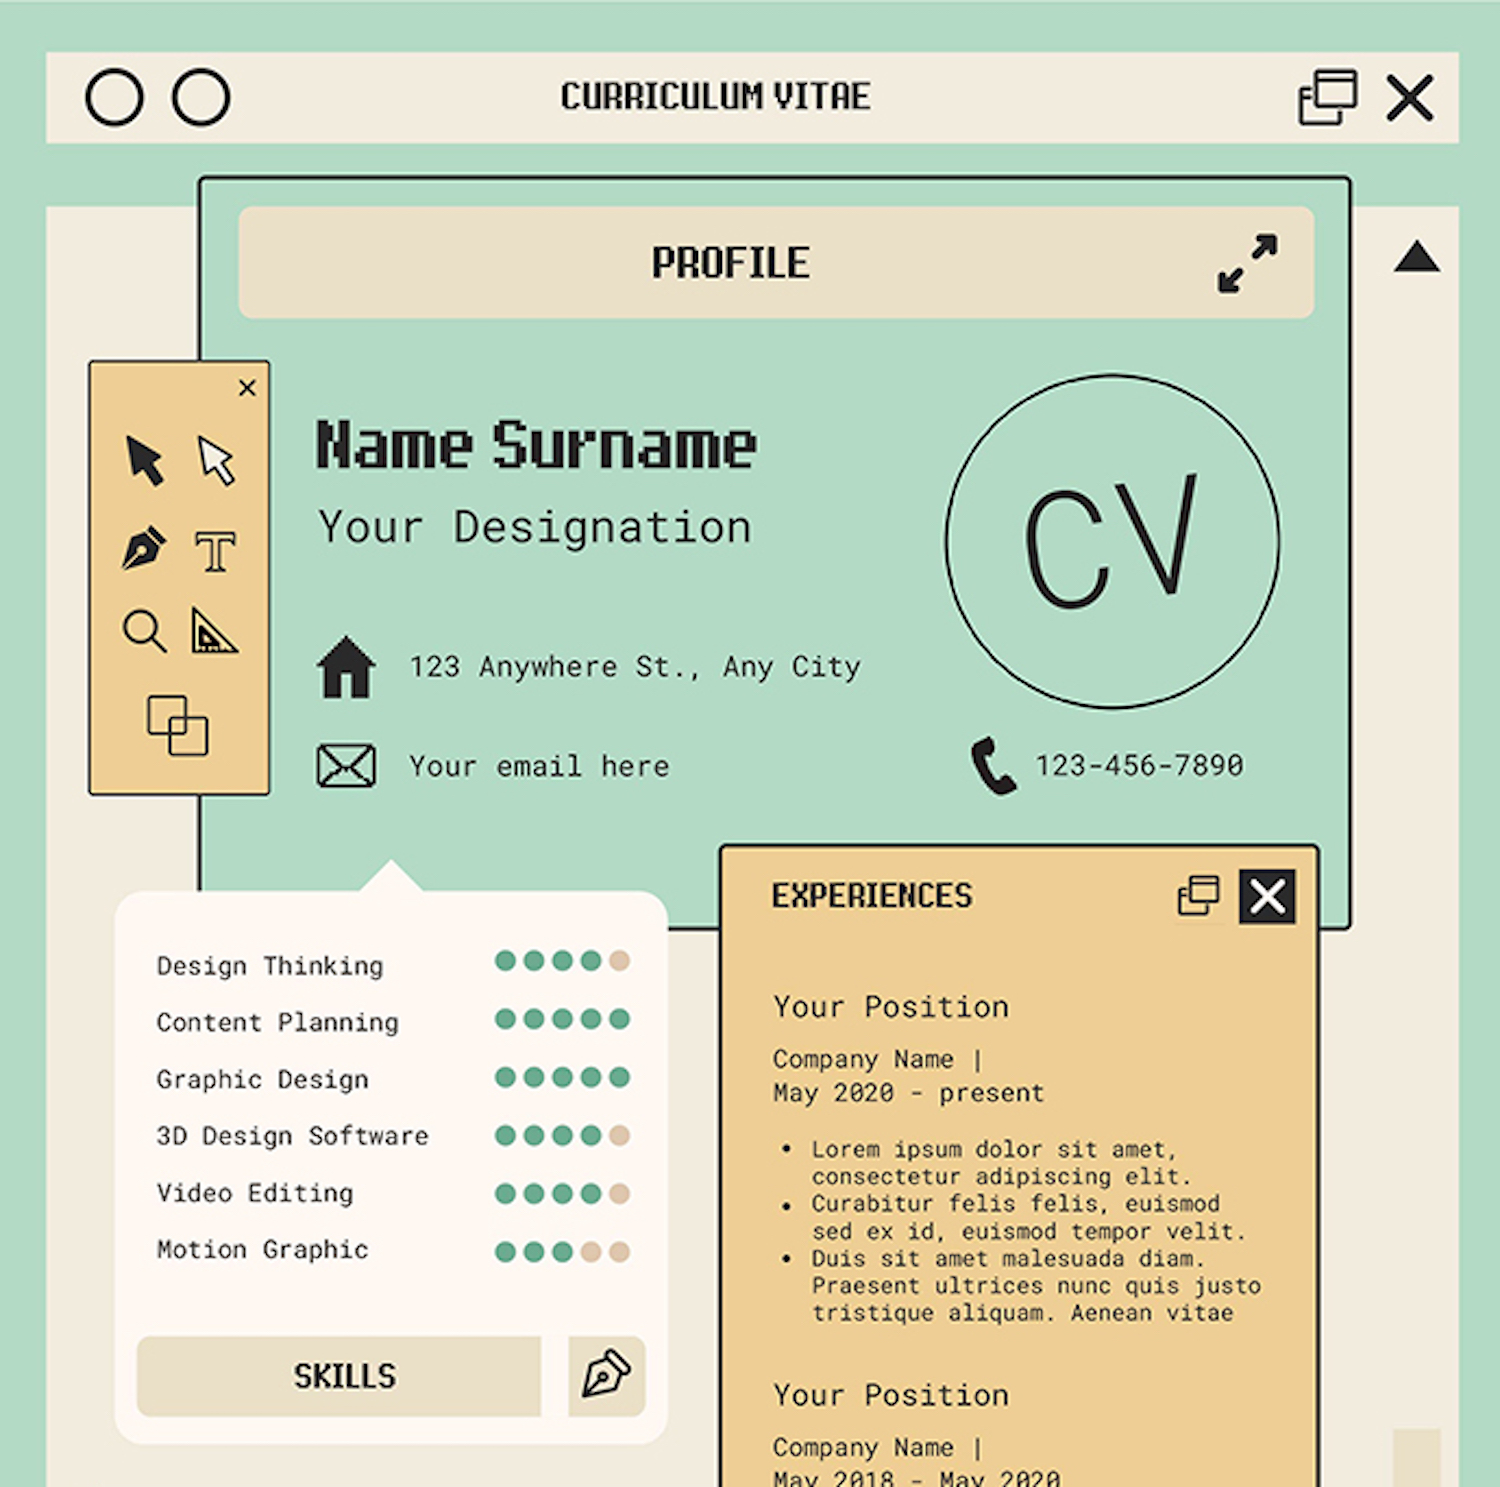 Professional Stylish Resume CV for Men and Women. Curriculum Vitae. previre image.